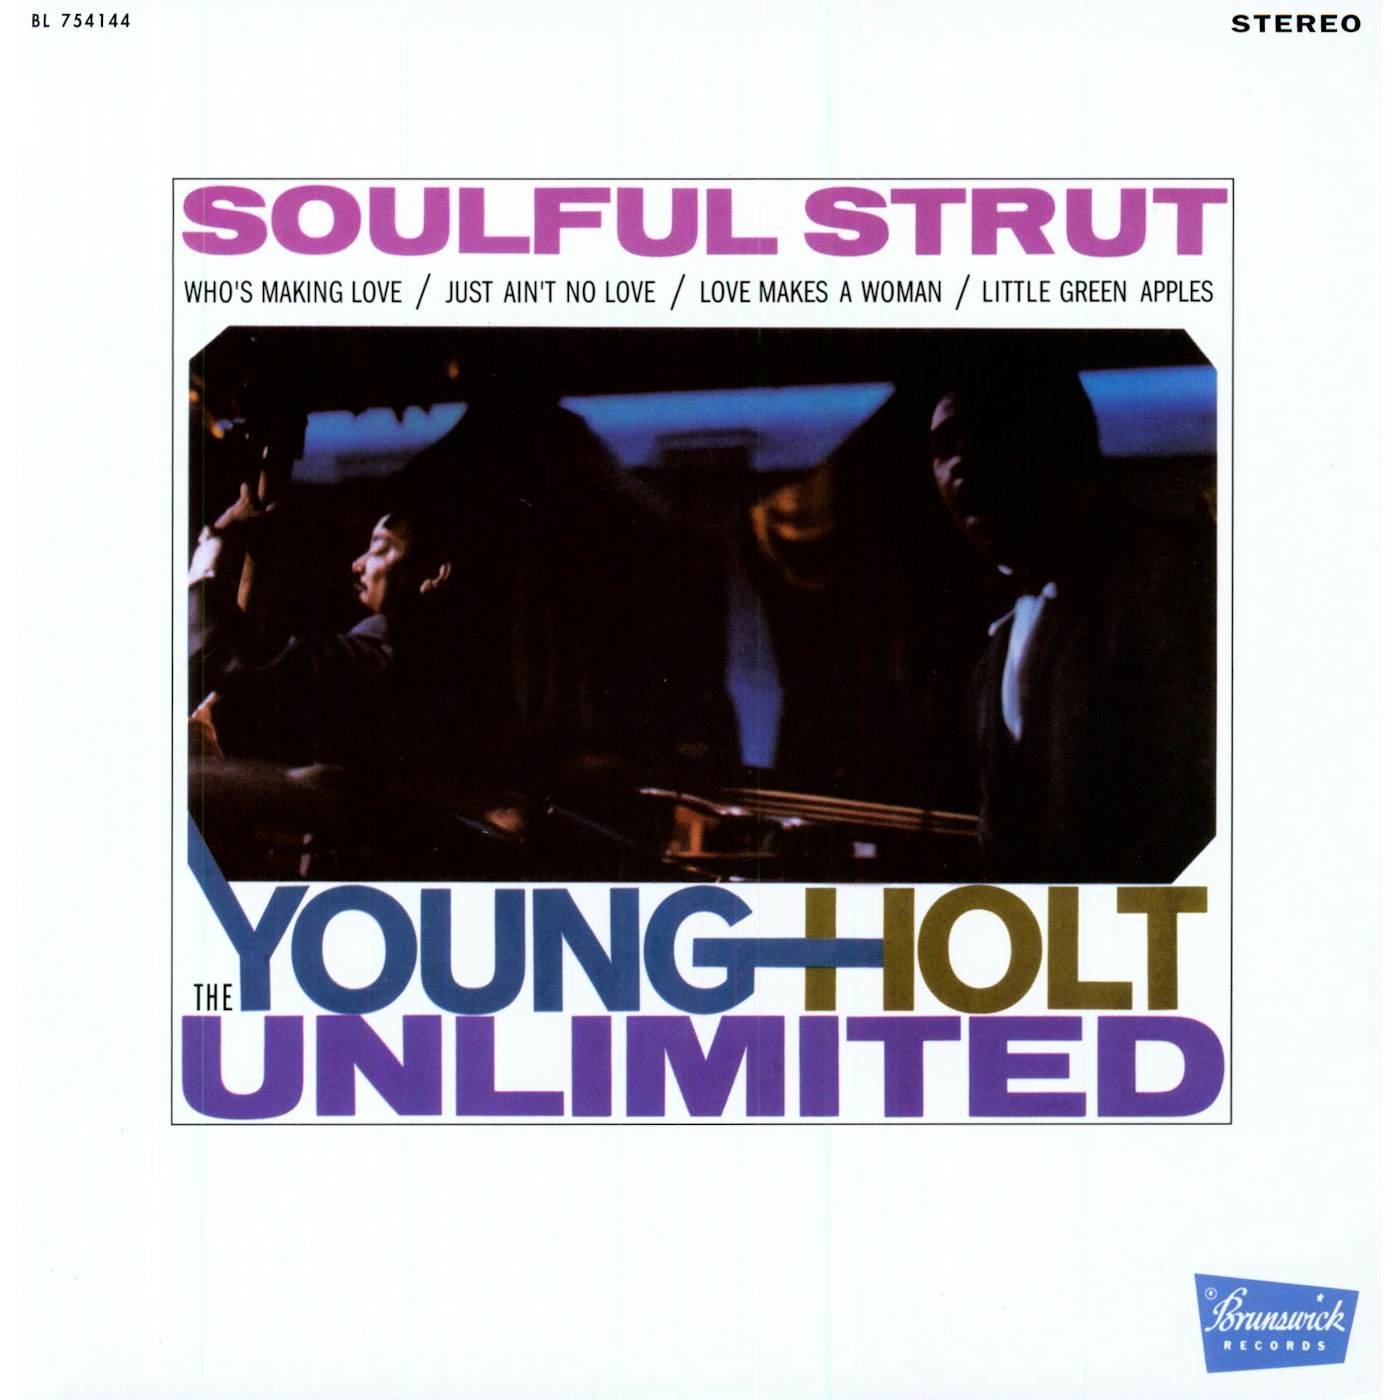 Young-Holt Unlimited SOULFUL STRUT Vinyl Record